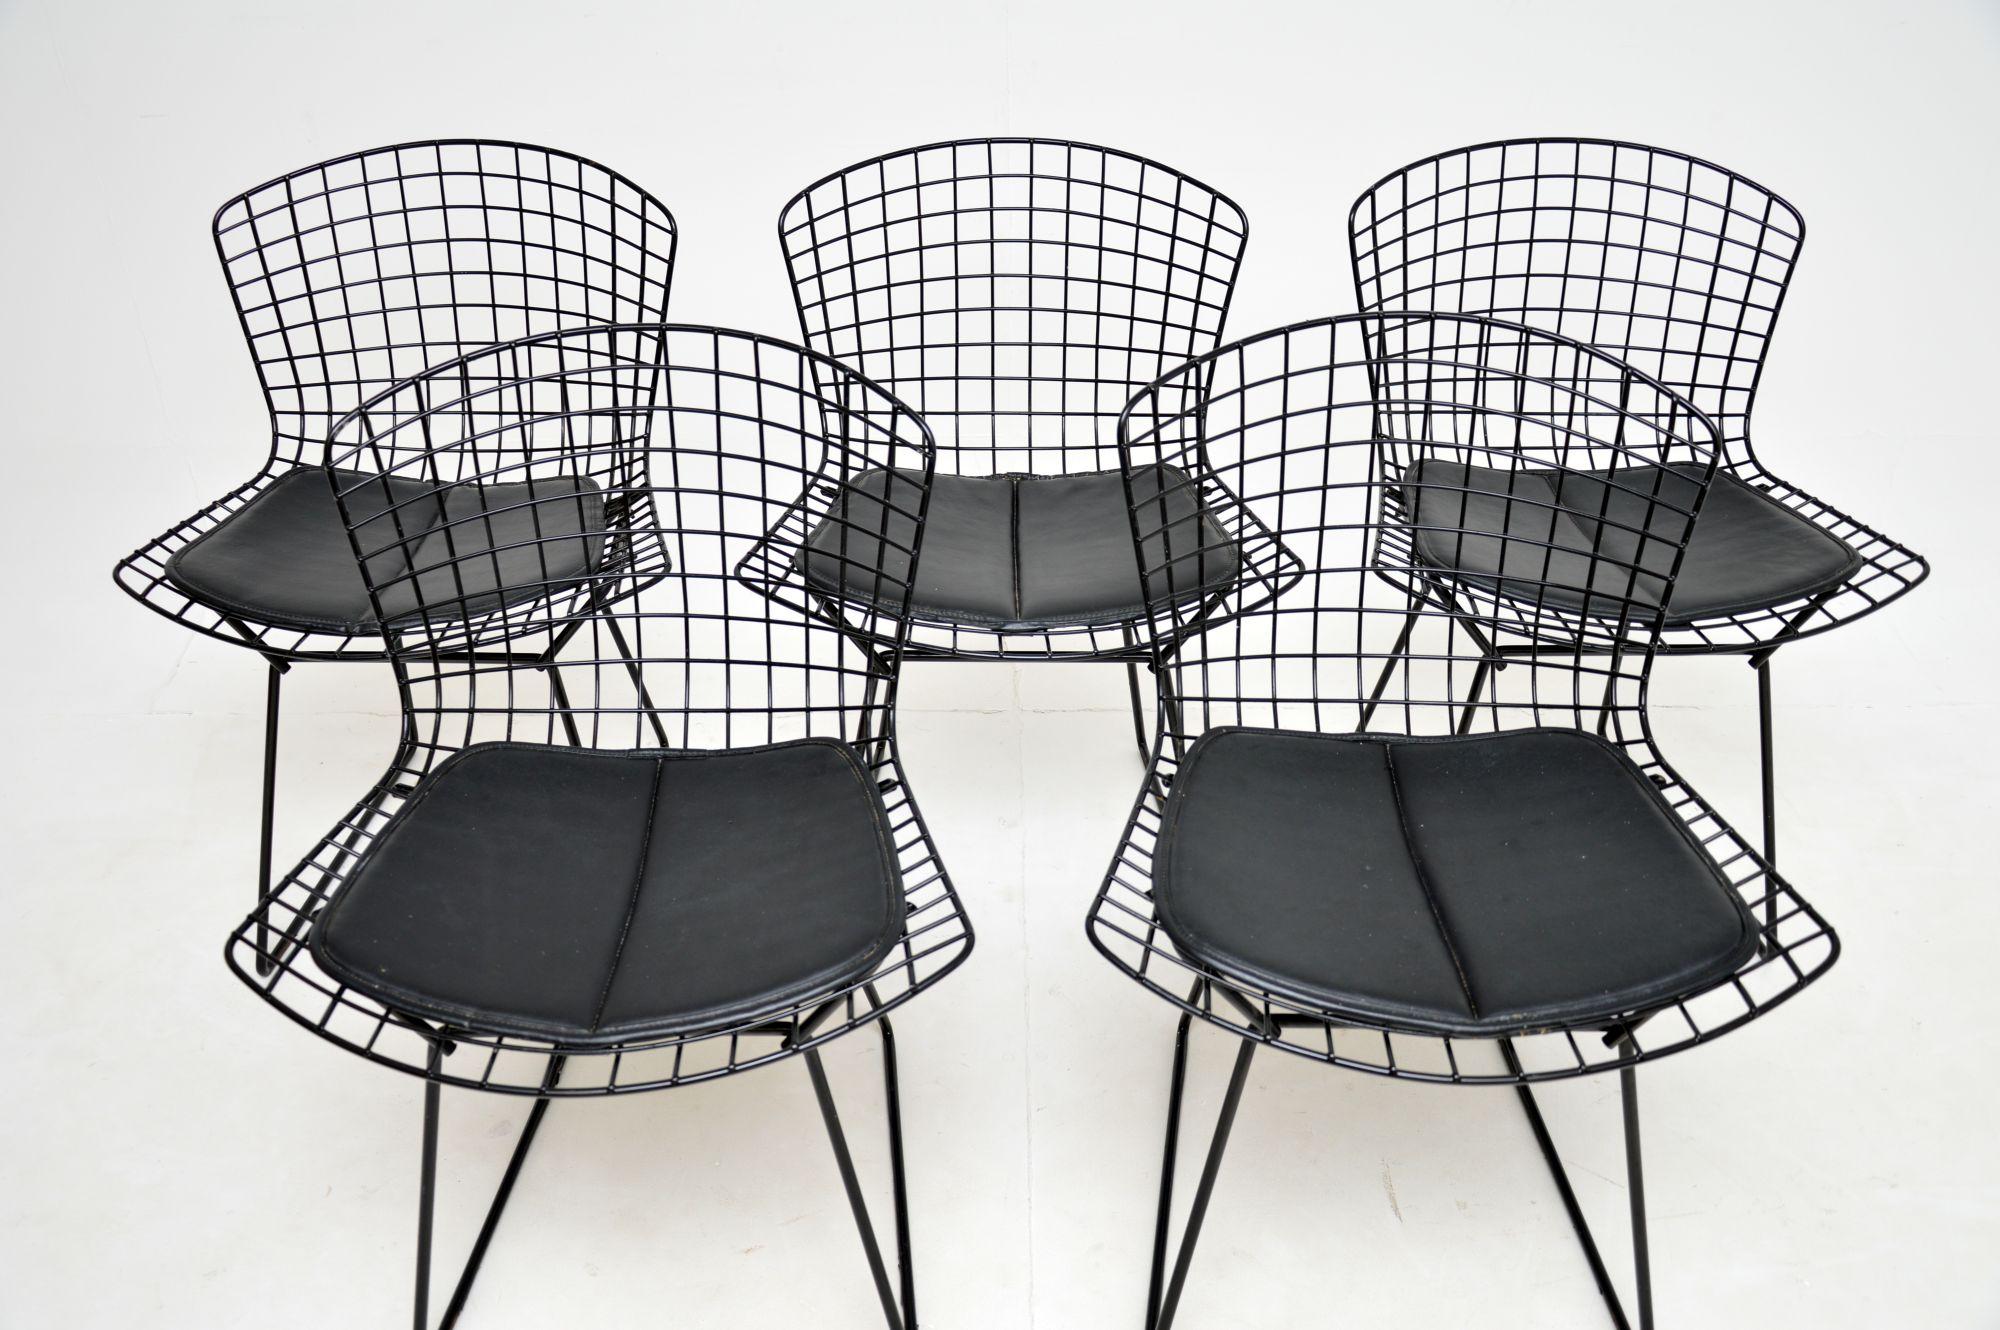 A superb set of original Harry Bertoia wire chairs made by Knoll. These were acquired by the previous owner in the 1960’s.

They are of amazing quality, this iconic design is very stylish and also comfortable. The black wire frames are in